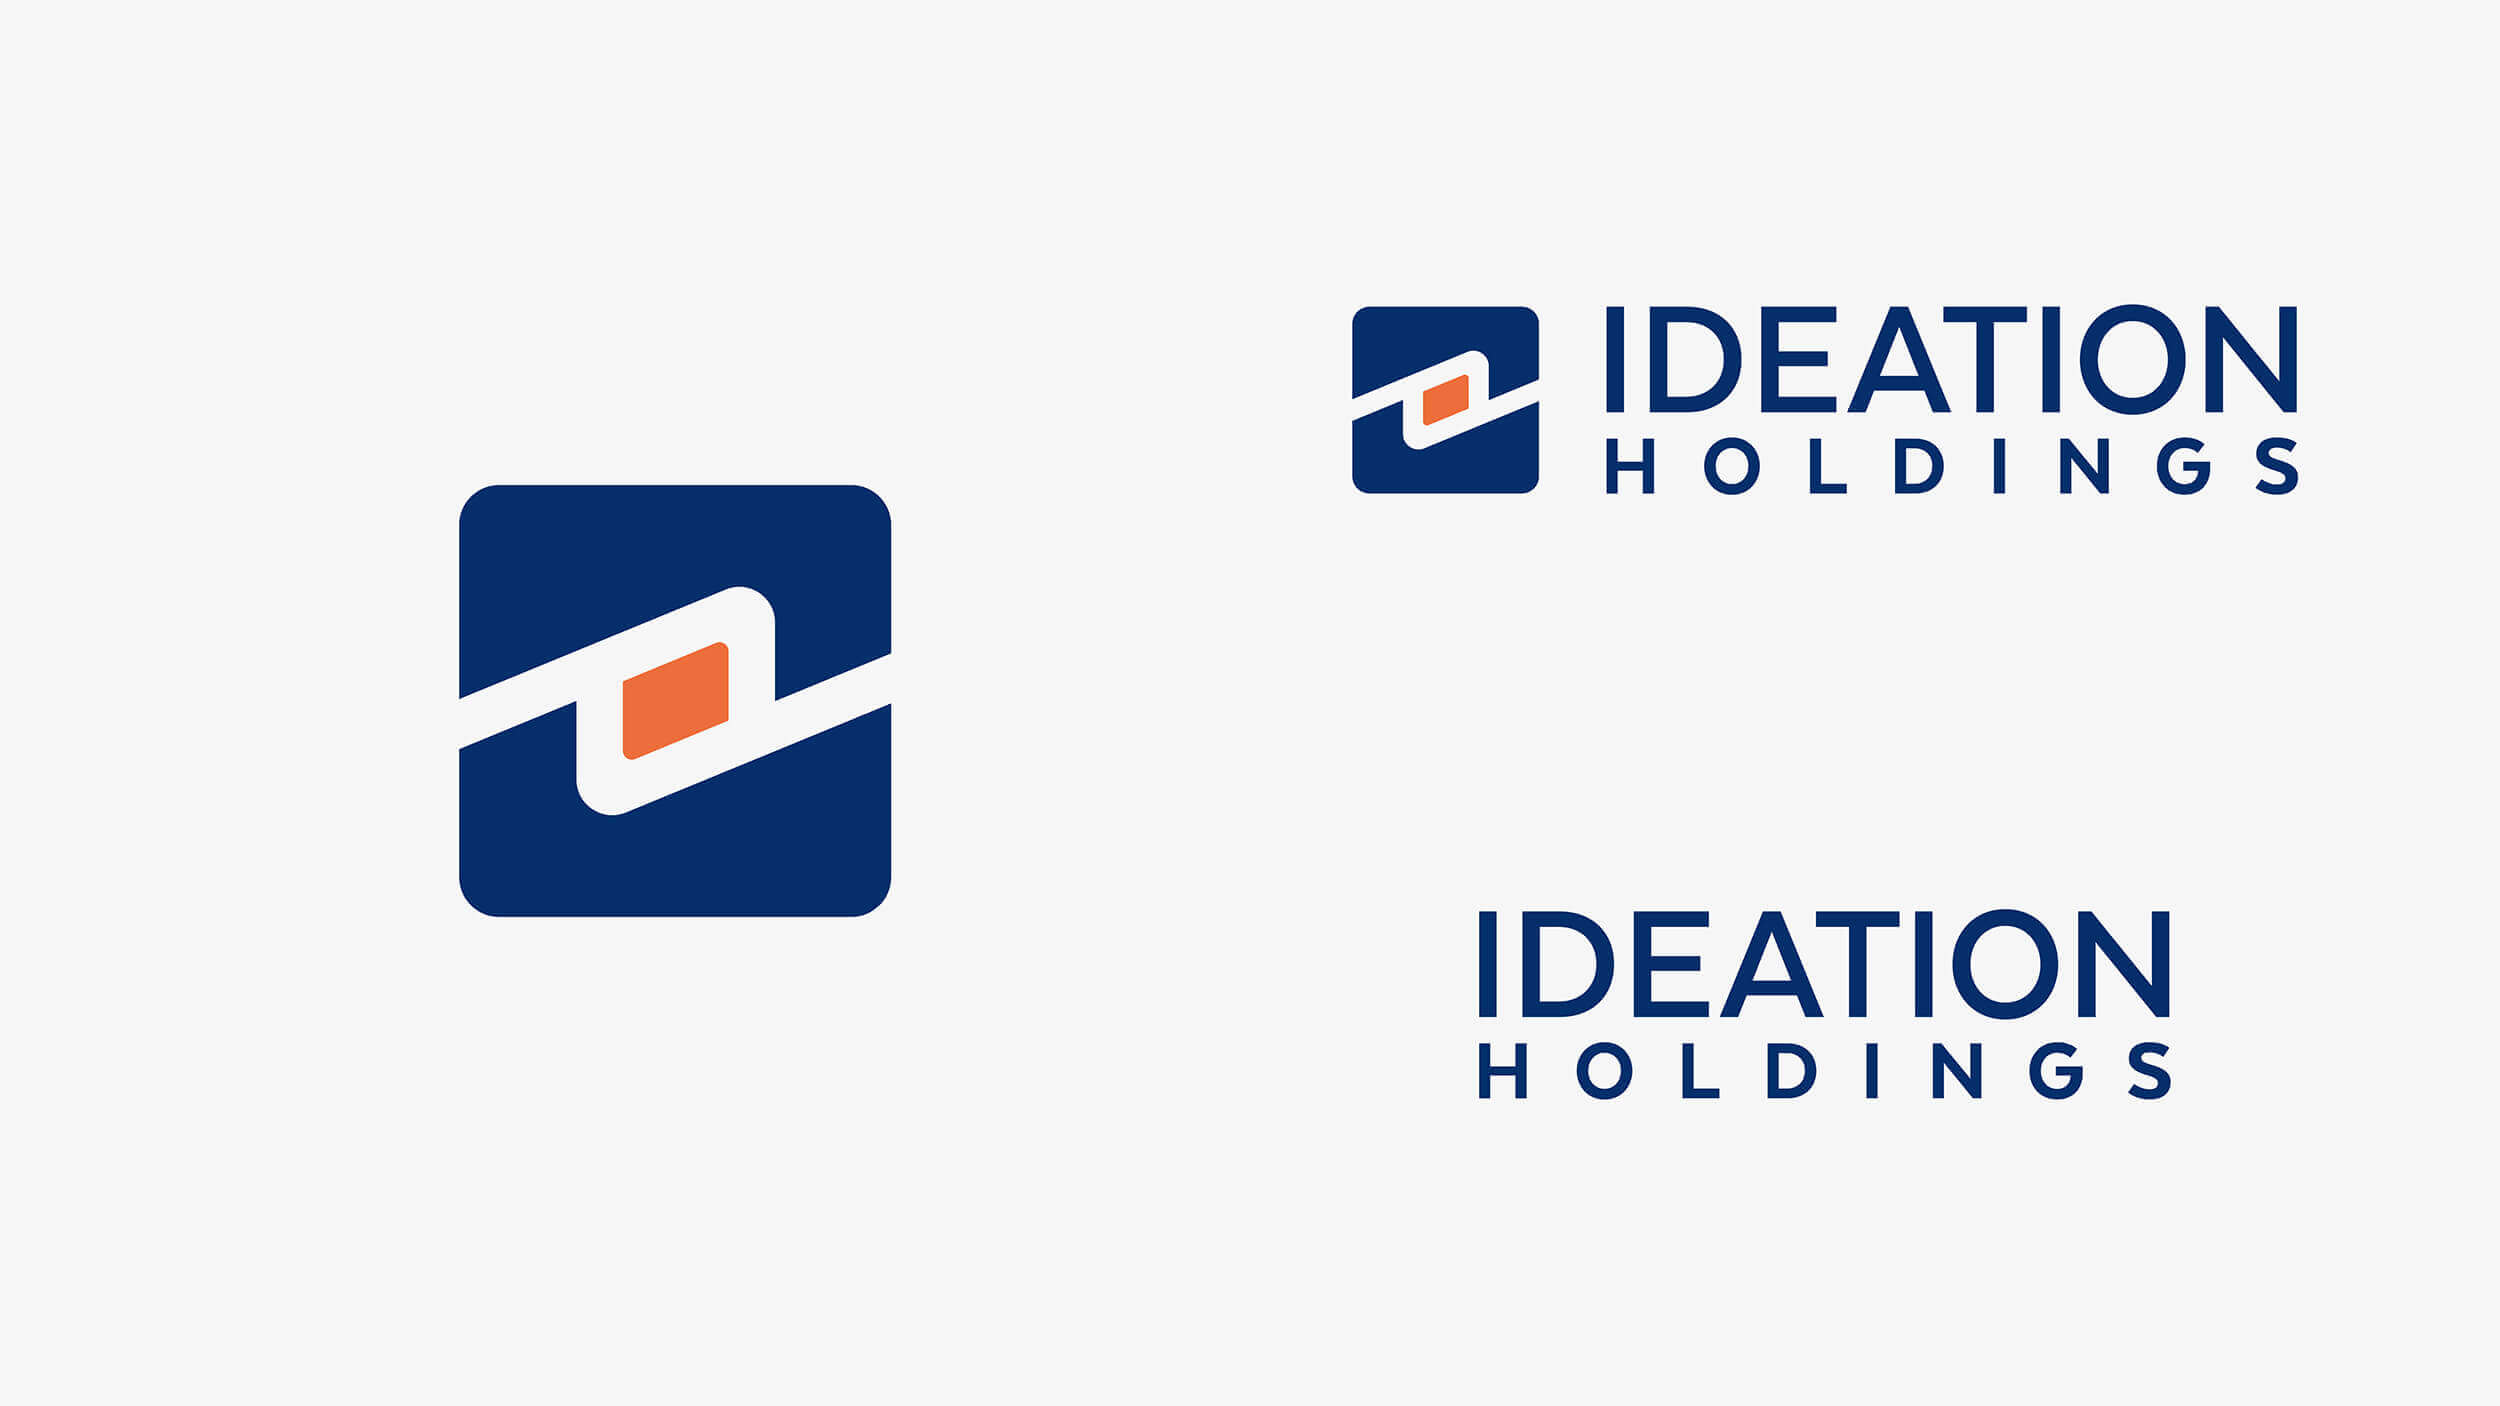 Logo system including brand mark and logotype for Ideation Holdings